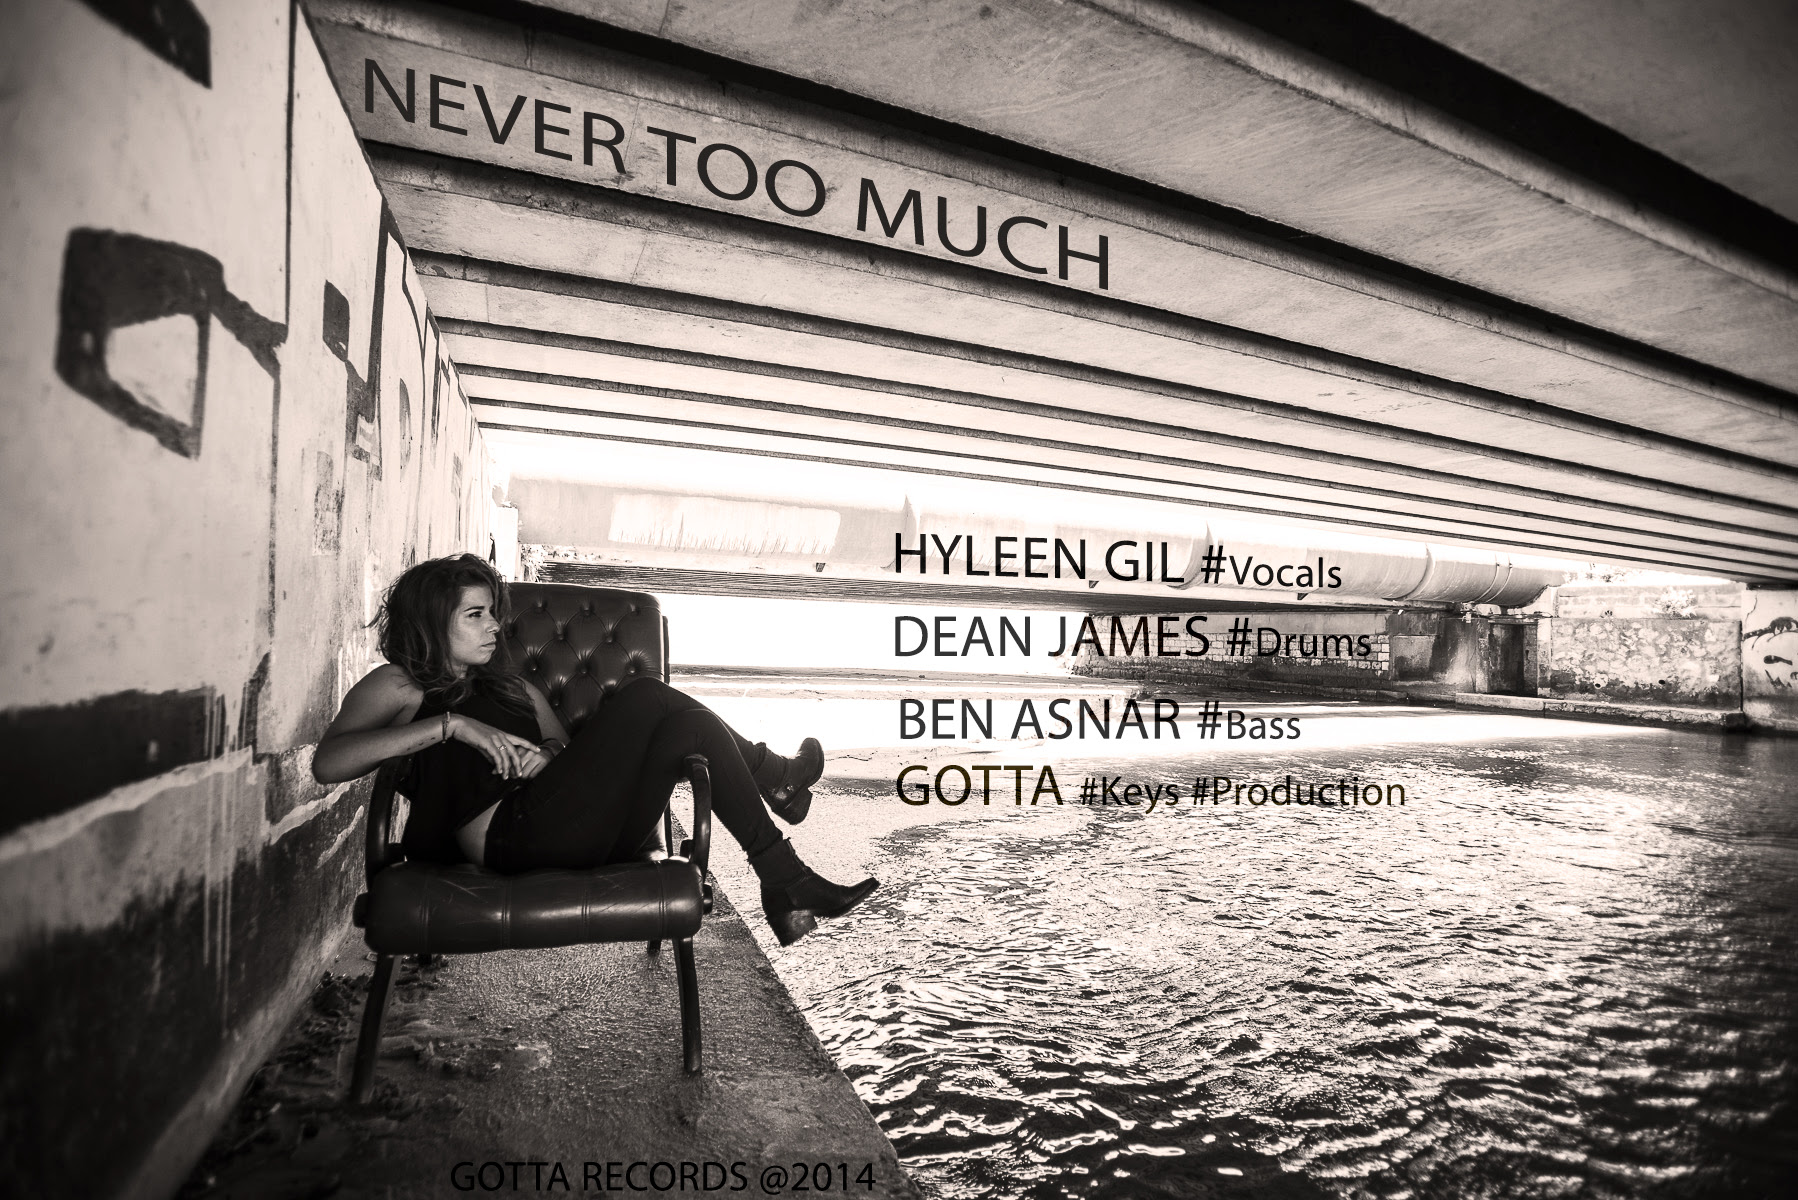 HYLEEN GIL - NEVER TOO MUCH